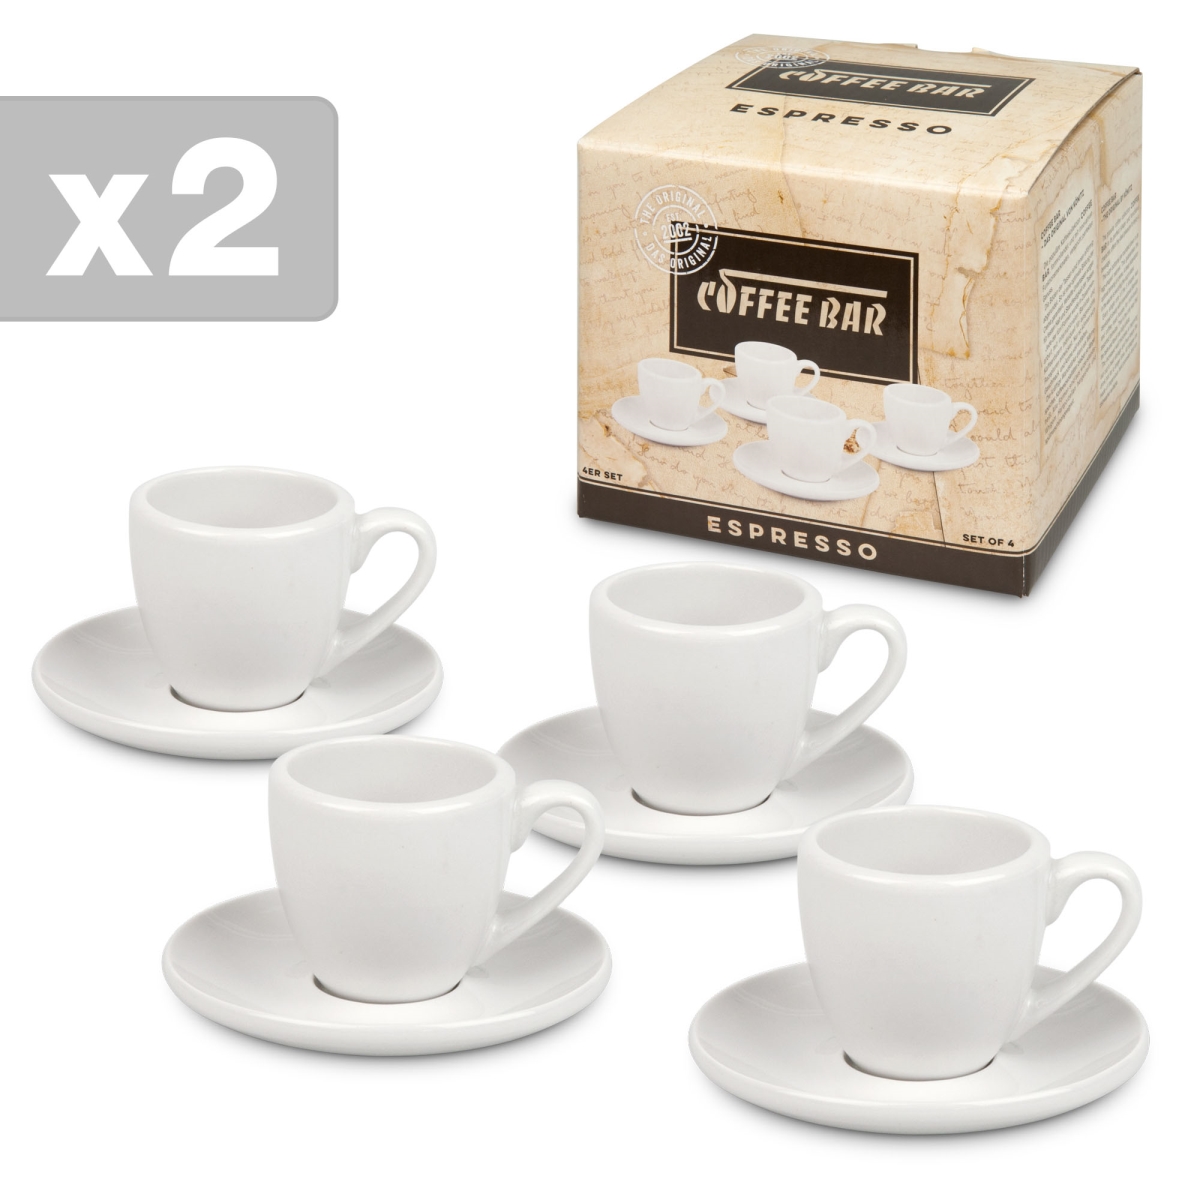 27 5 001 0001 No-1 Two Giftboxed Coffee Bar Cappuccino Cups & Saucers - Set Of 4